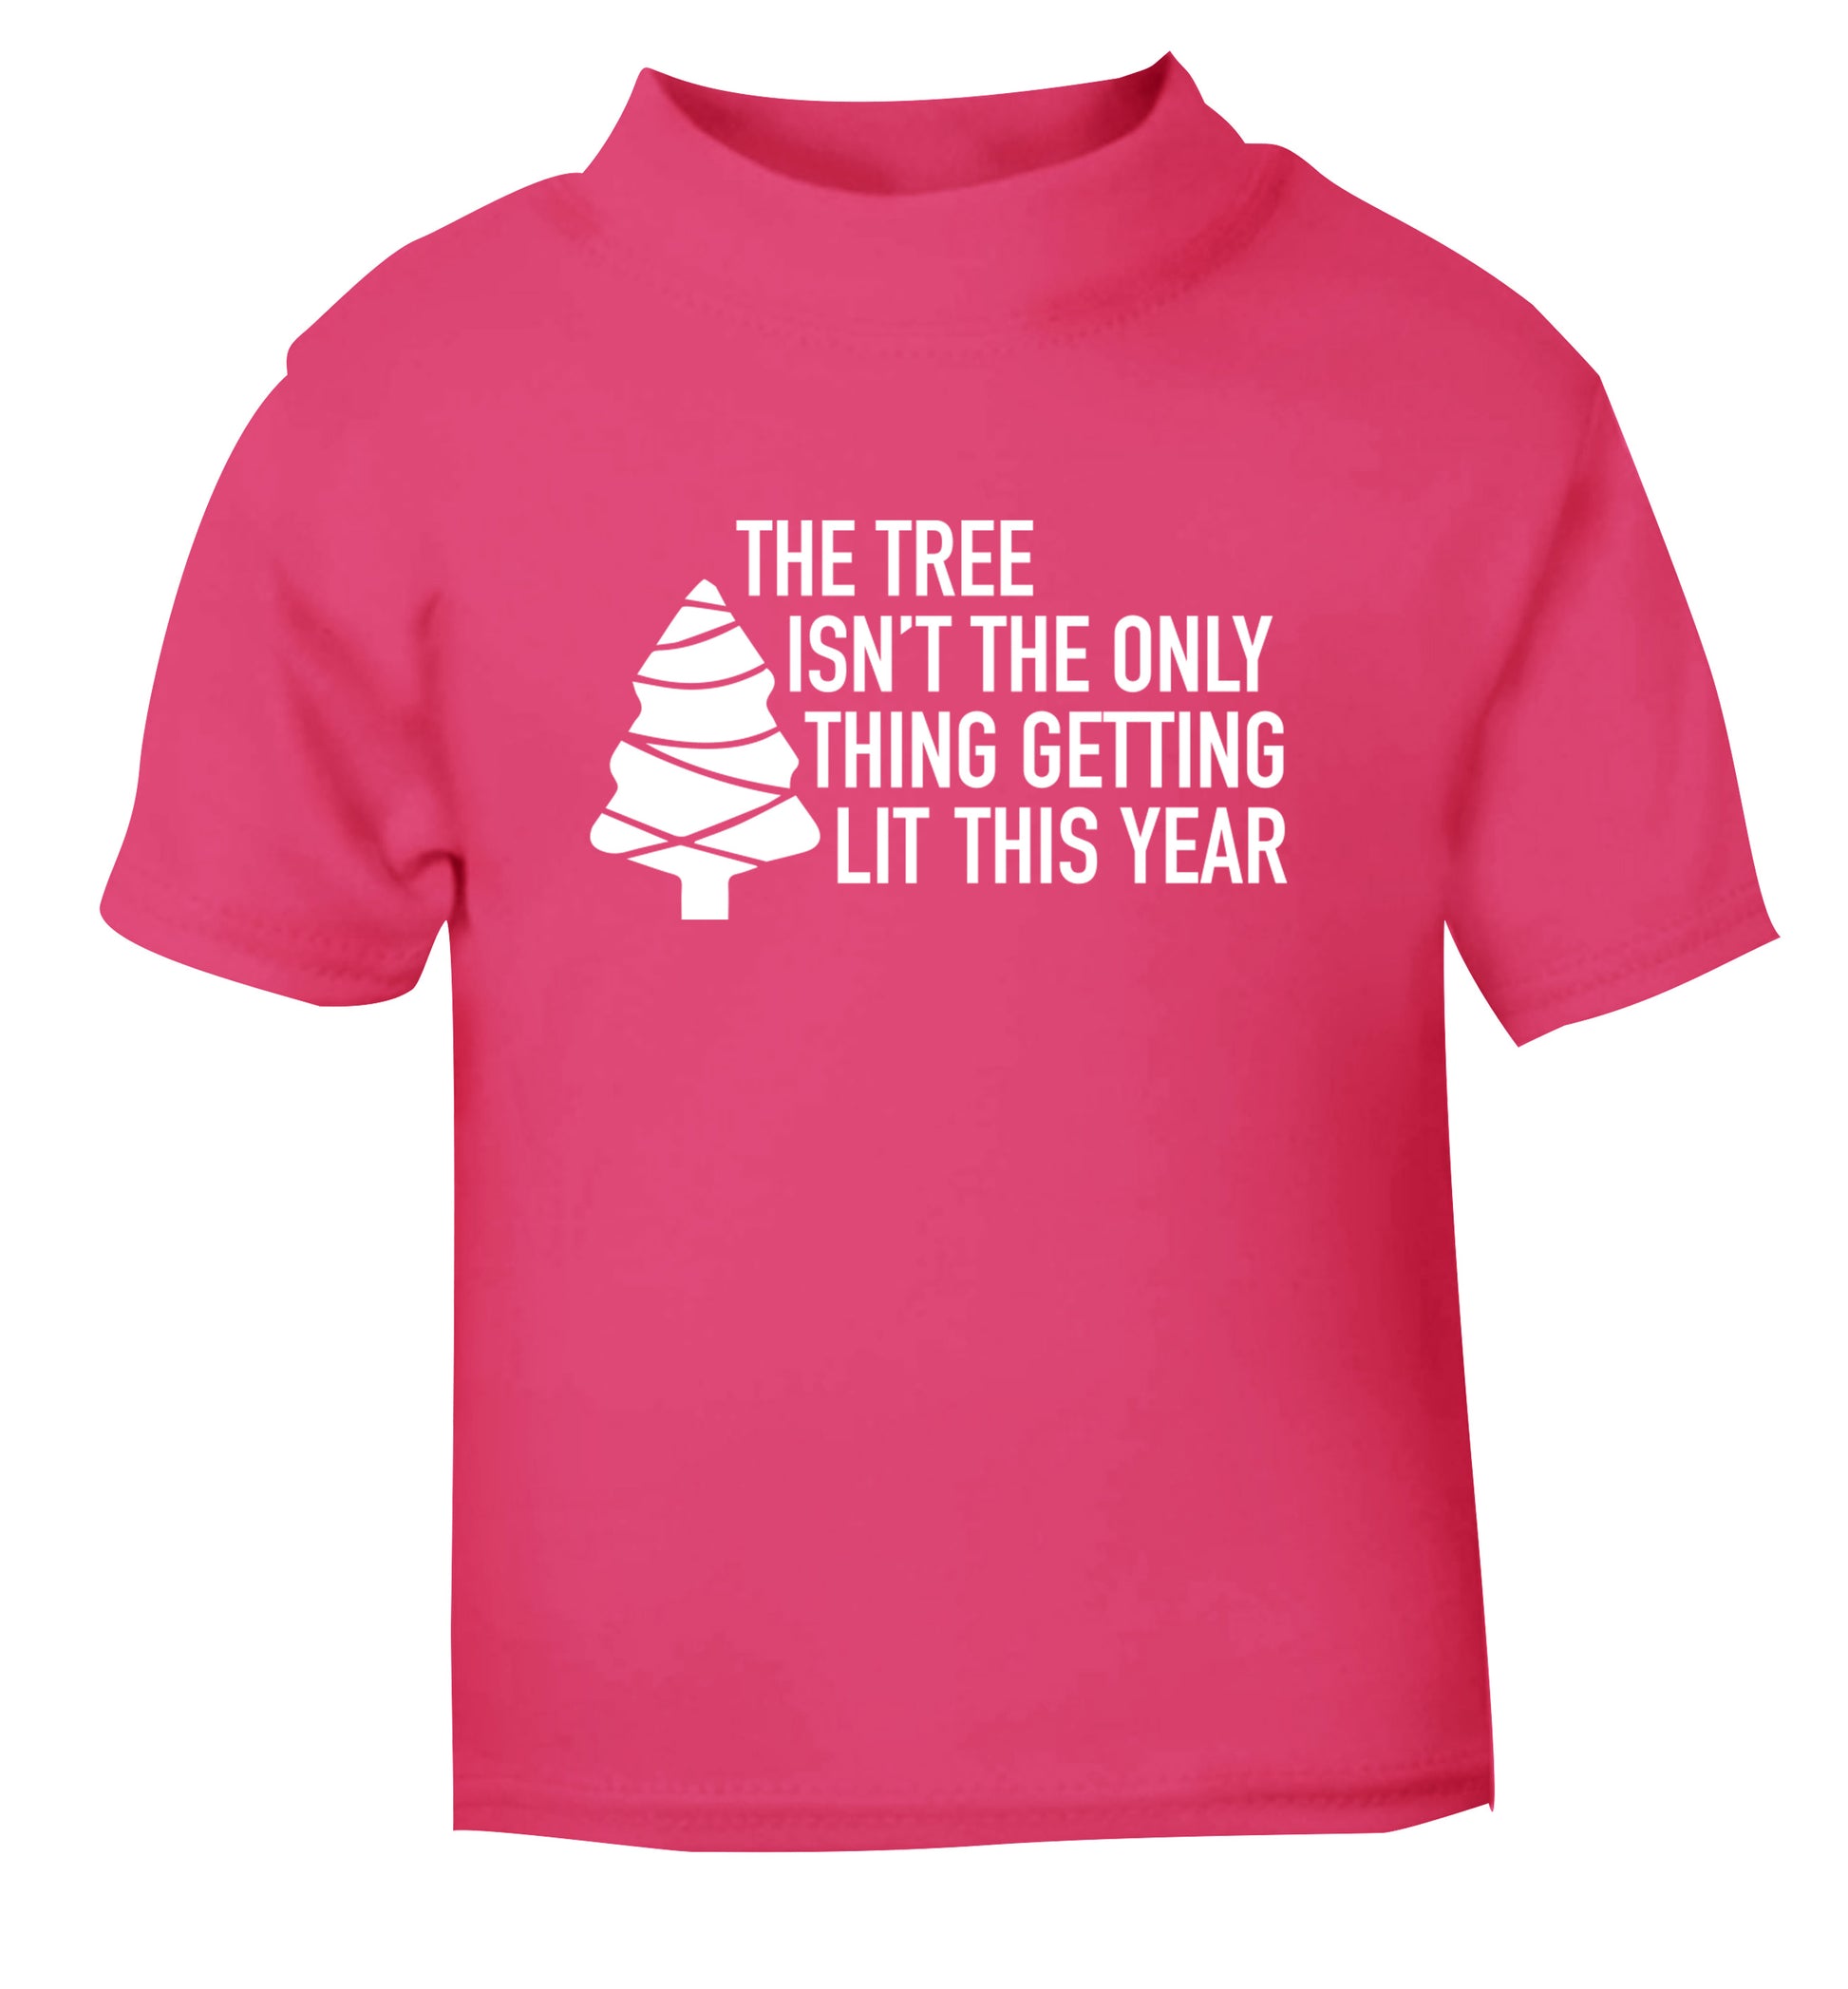 The tree isn't the only thing getting lit this year pink Baby Toddler Tshirt 2 Years